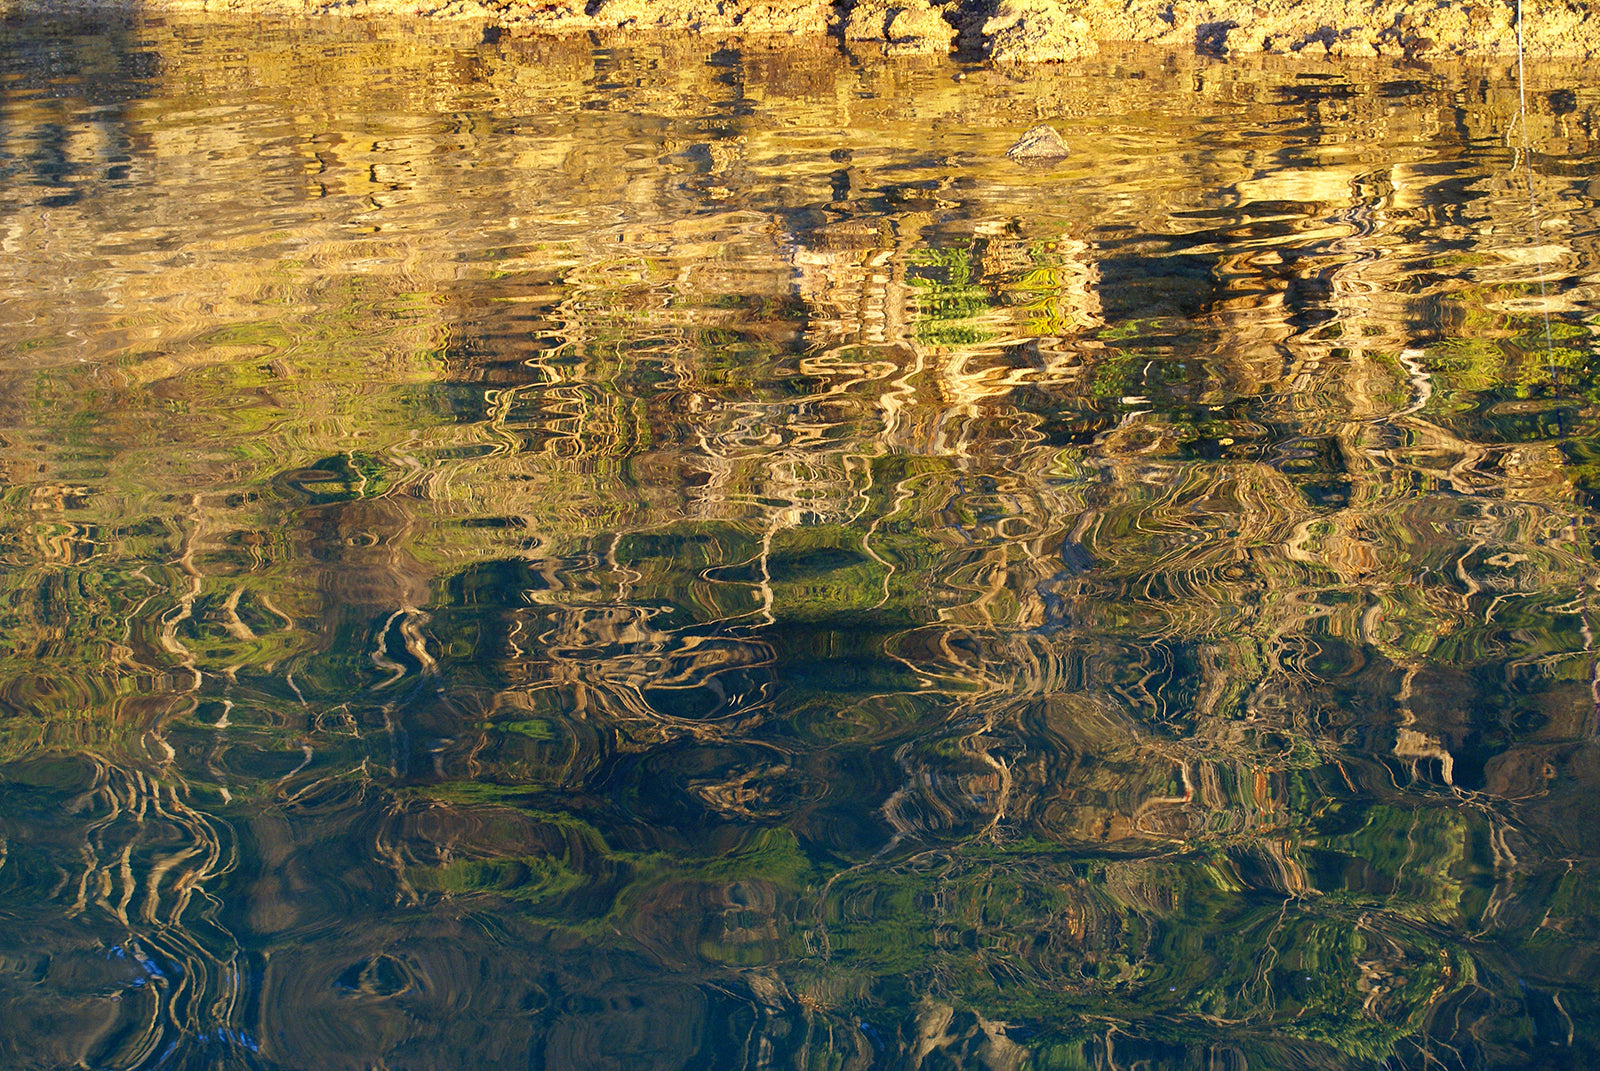 Warm morning glow reflecting greenery on the rippled water.